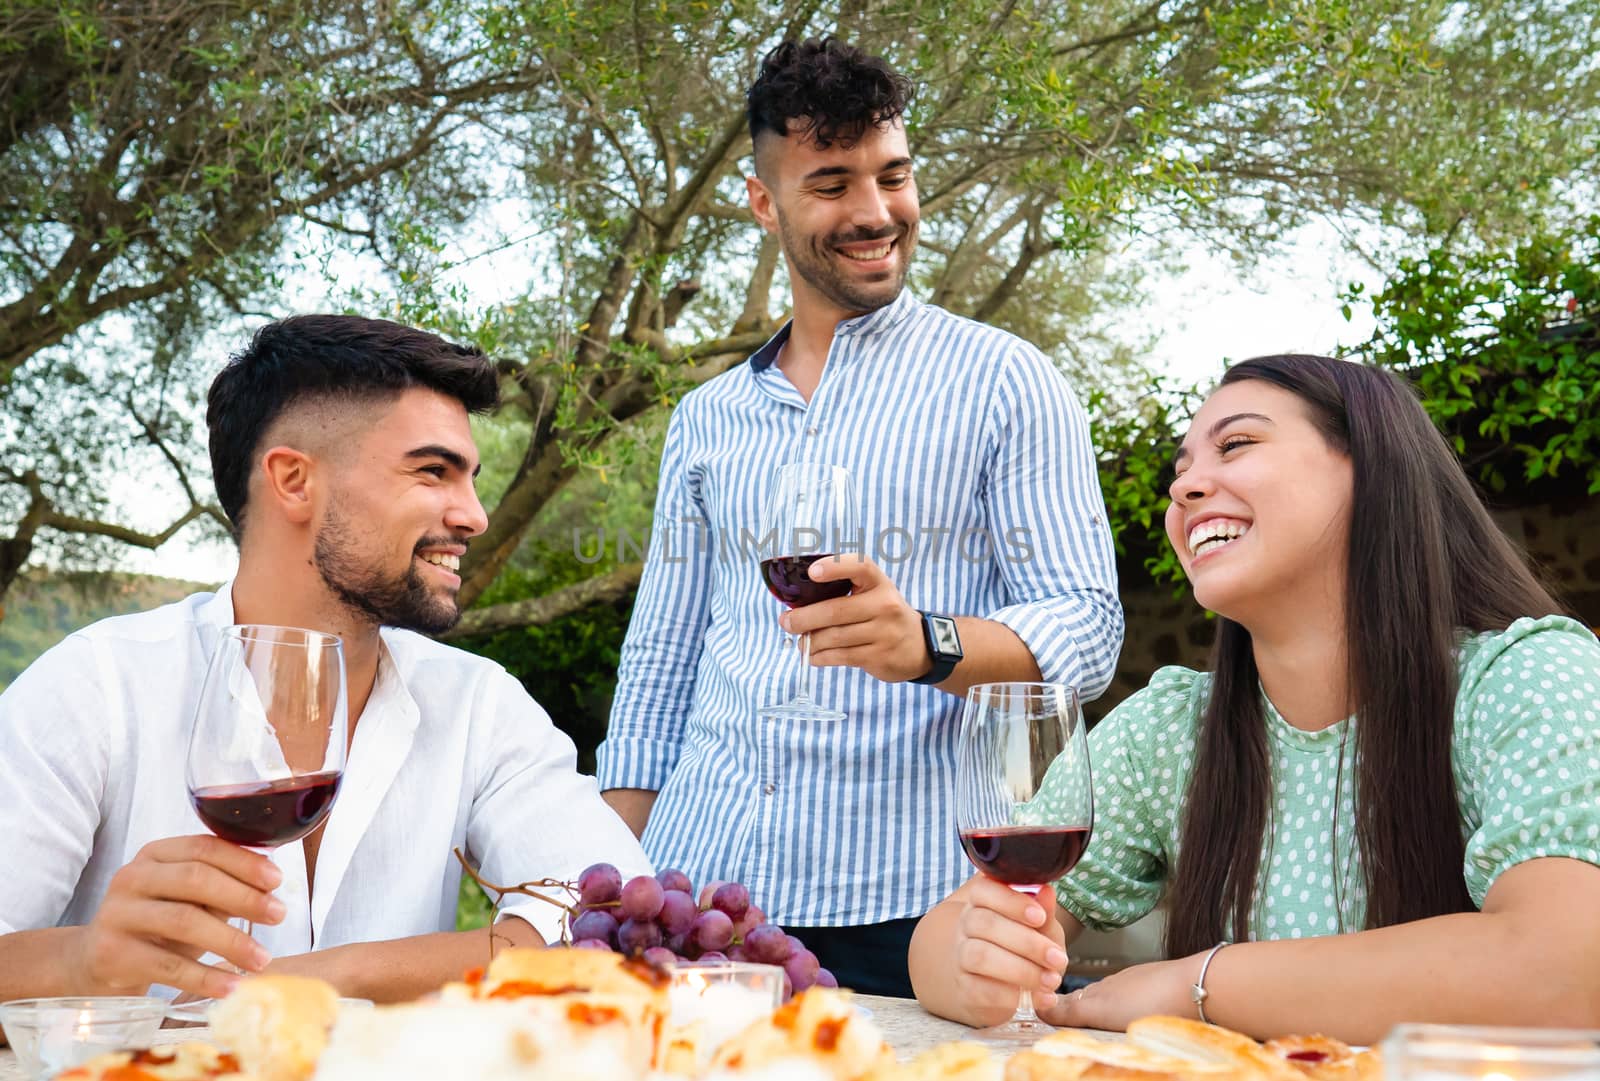 Three attractive young happy people celebrating outdoor holding red wine glasses - Stylish millennial friends having fun in the garden drinking alcohol at a table laden with snacks and grapes by robbyfontanesi